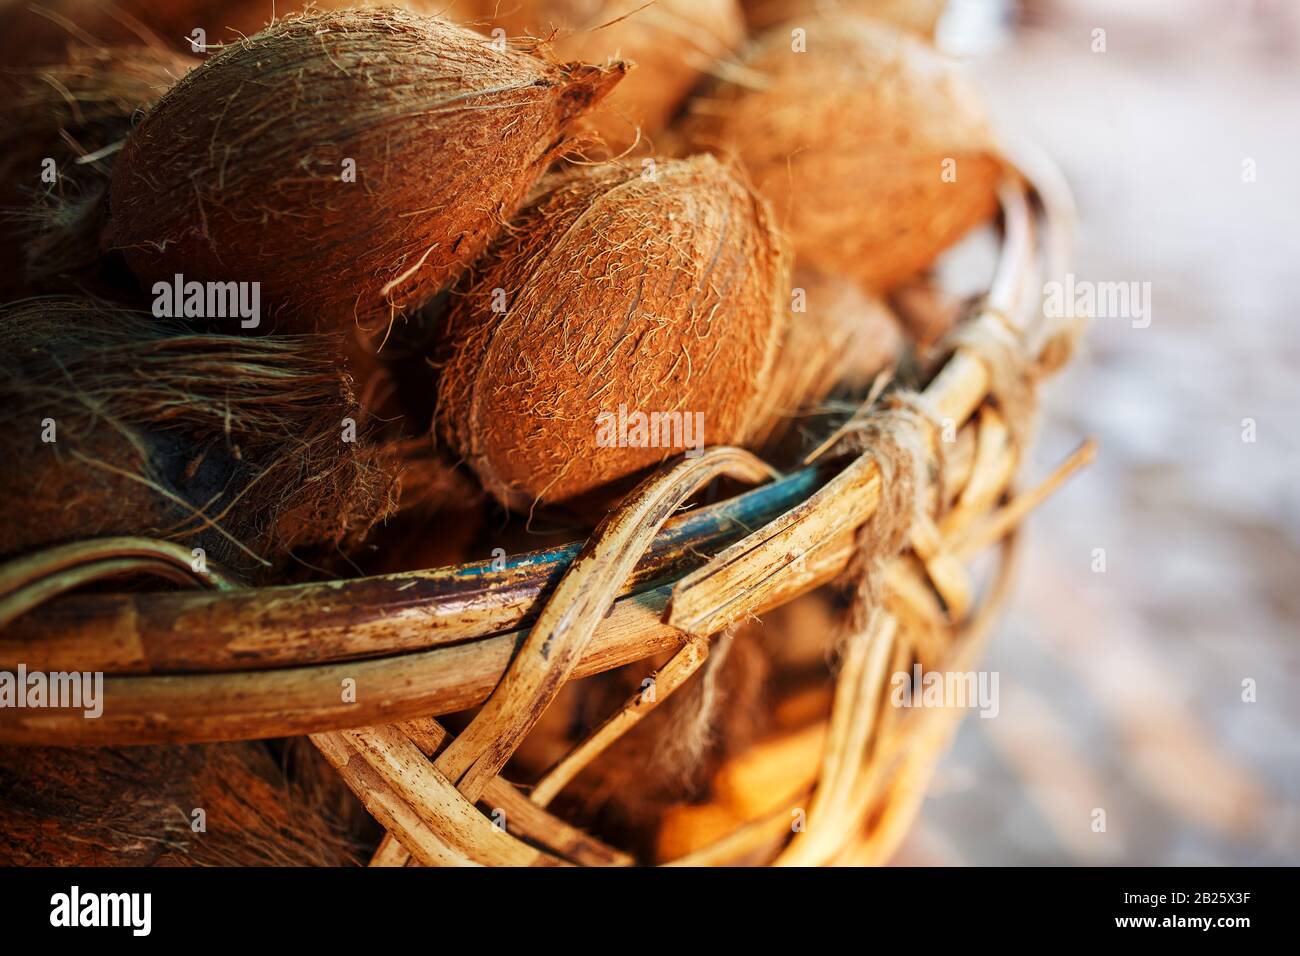 Coconuts in a wicker basket of brown color with fibers lit by sunlight.  Stack on the market. India Stock Photo - Alamy